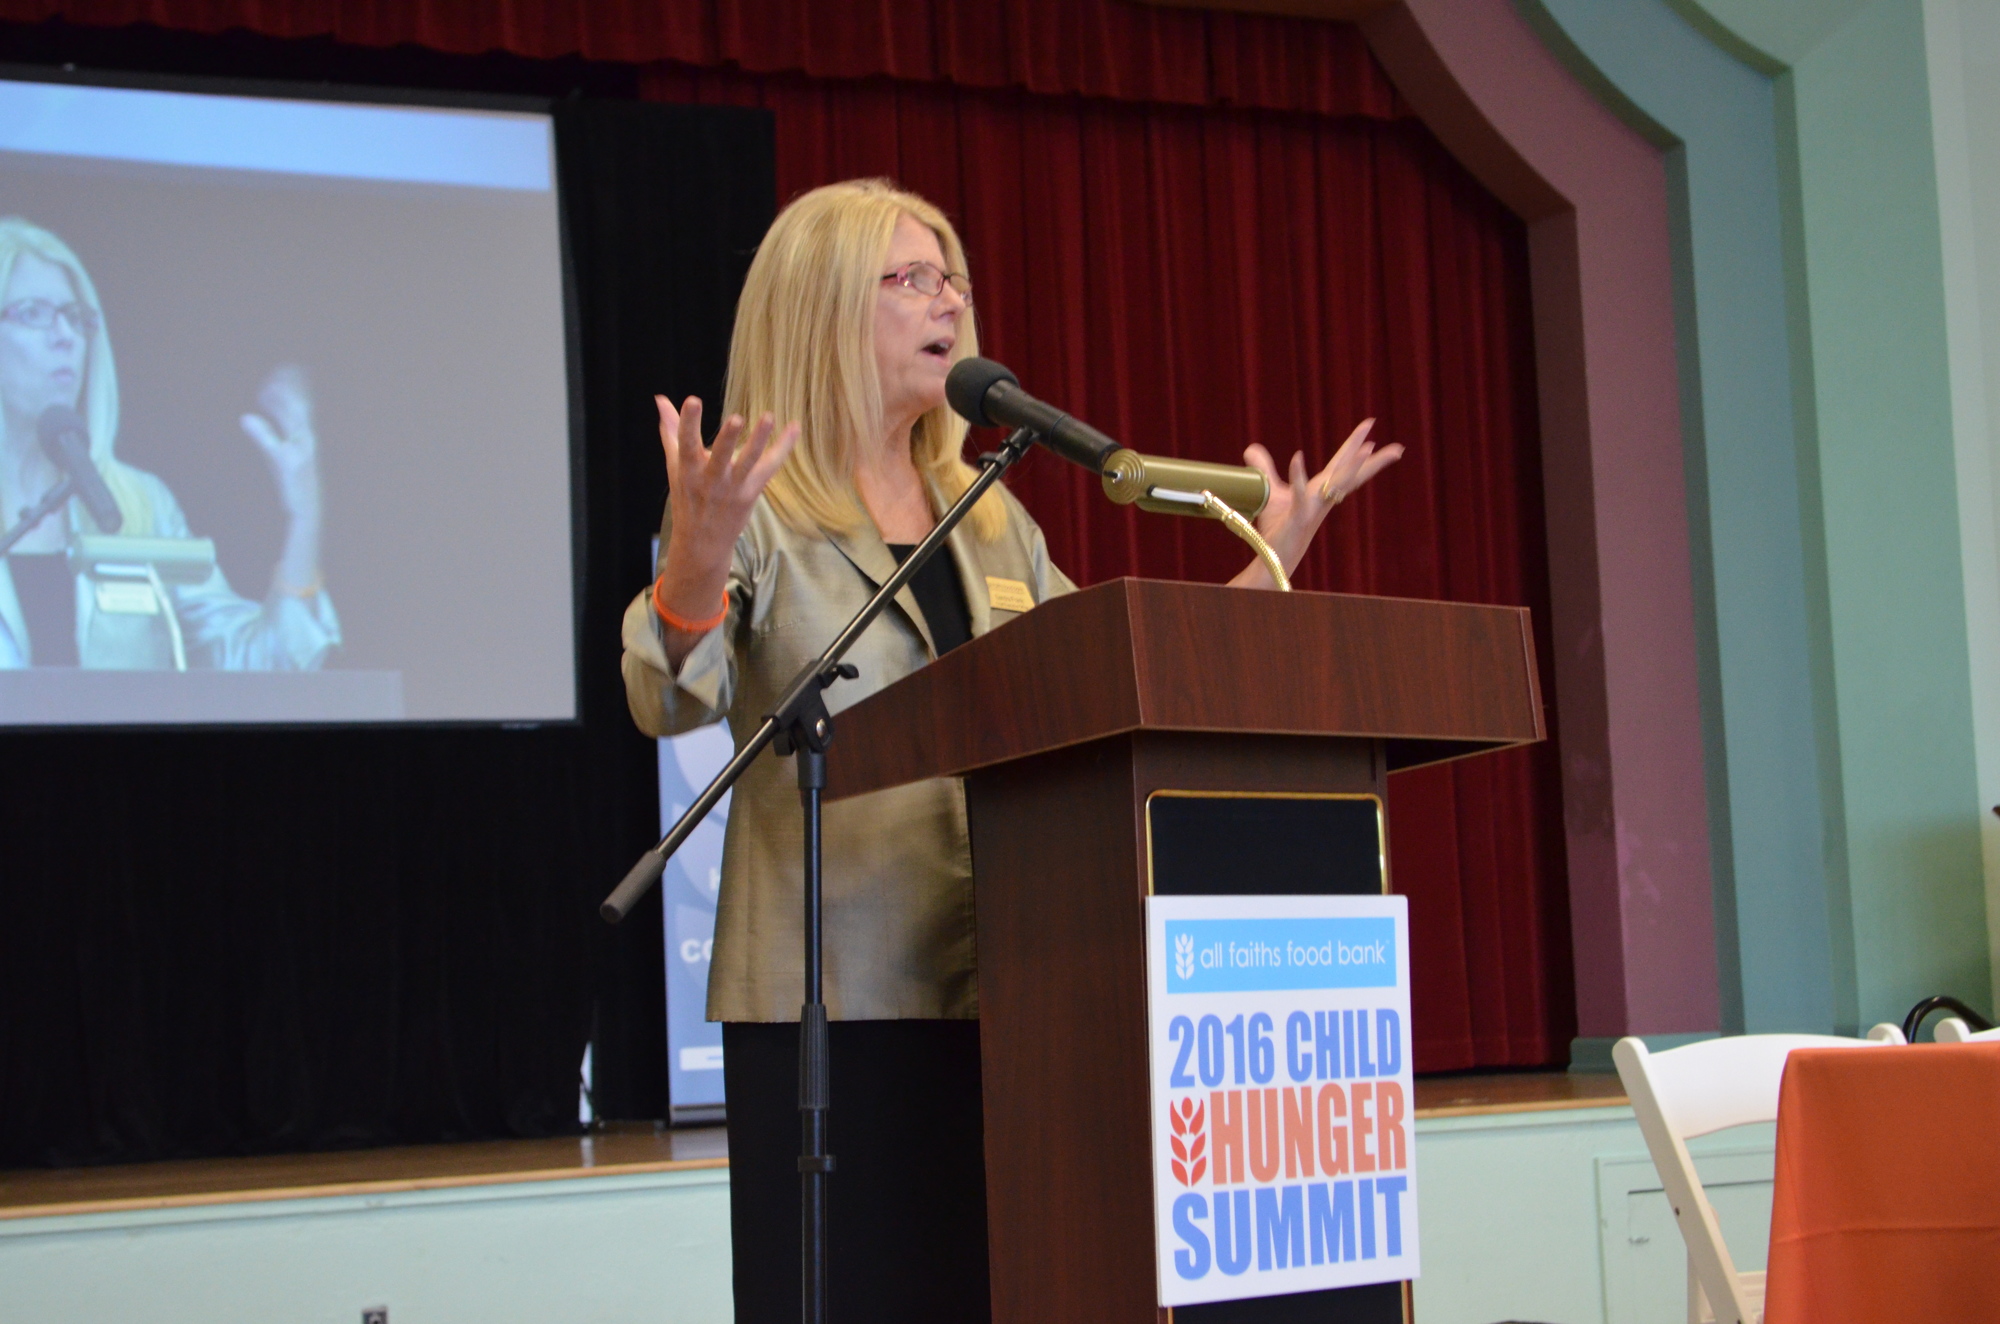 All Faiths Food Bank CEO Sandra Frank addresses guests at the 2016 Child Hunger Summit Tuesday, Sept. 27 at the Sarasota Municipal Auditorium.